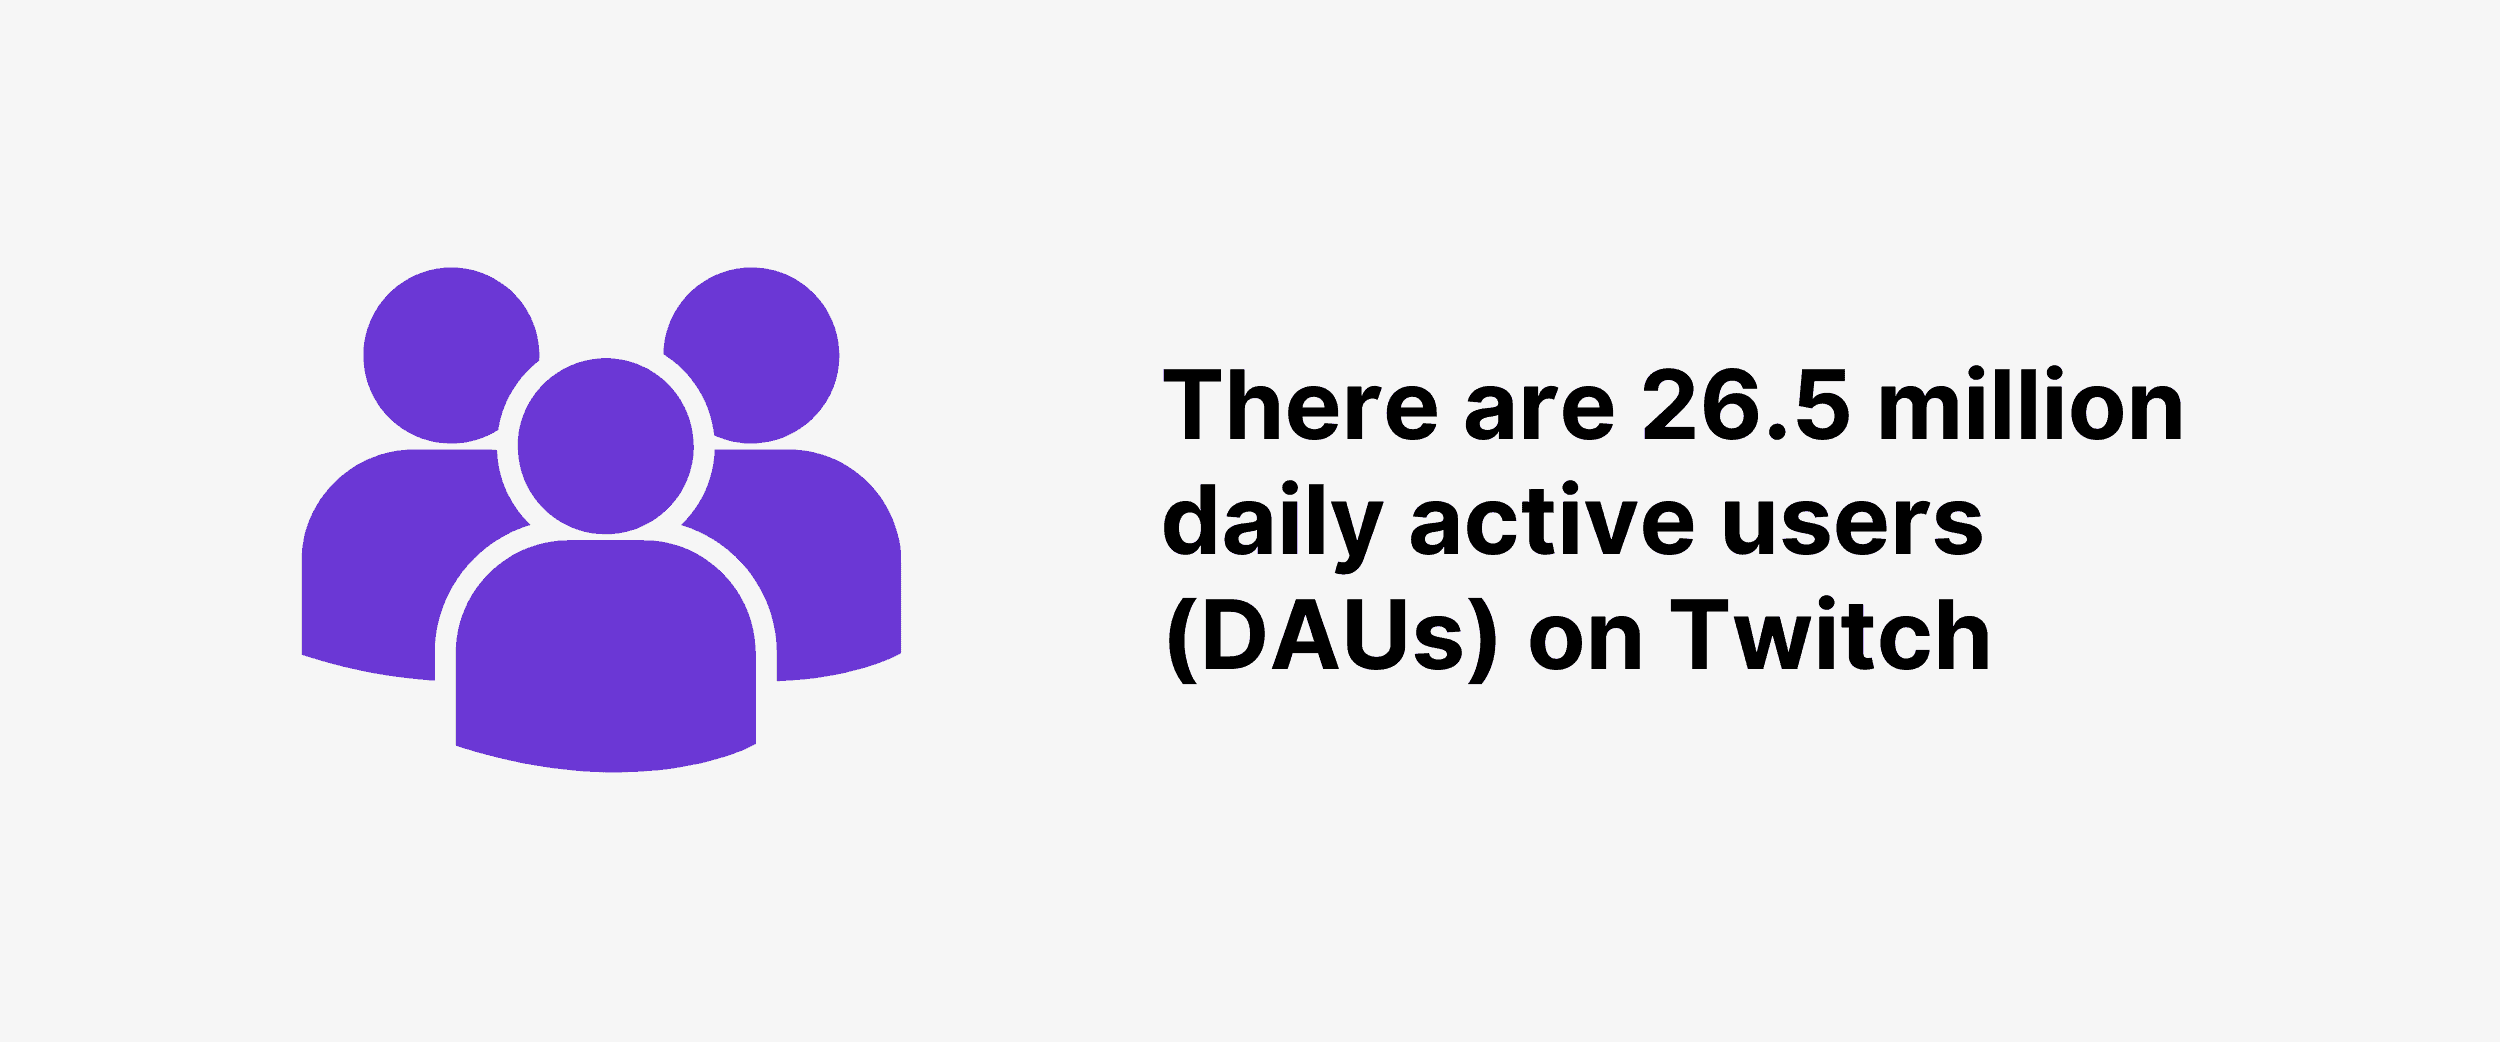 There are 26.5 million daily active users (DAUs) on Twitch